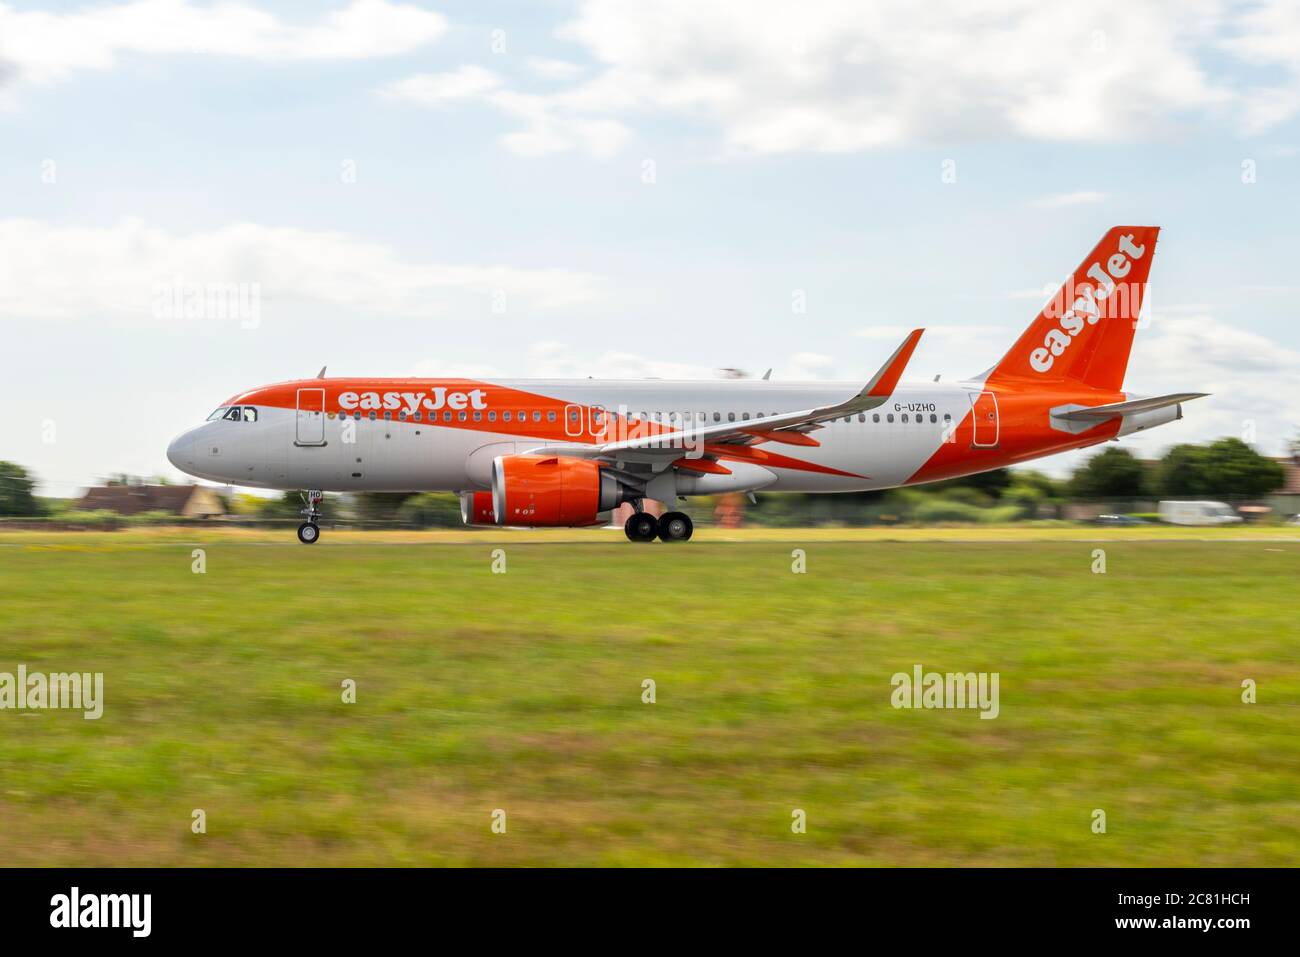 First resumed easyJet departure from London Southend Airport, Essex, UK after COVID-19 lockdown. Heading to Alicante, Spain. Speeding up for take off Stock Photo